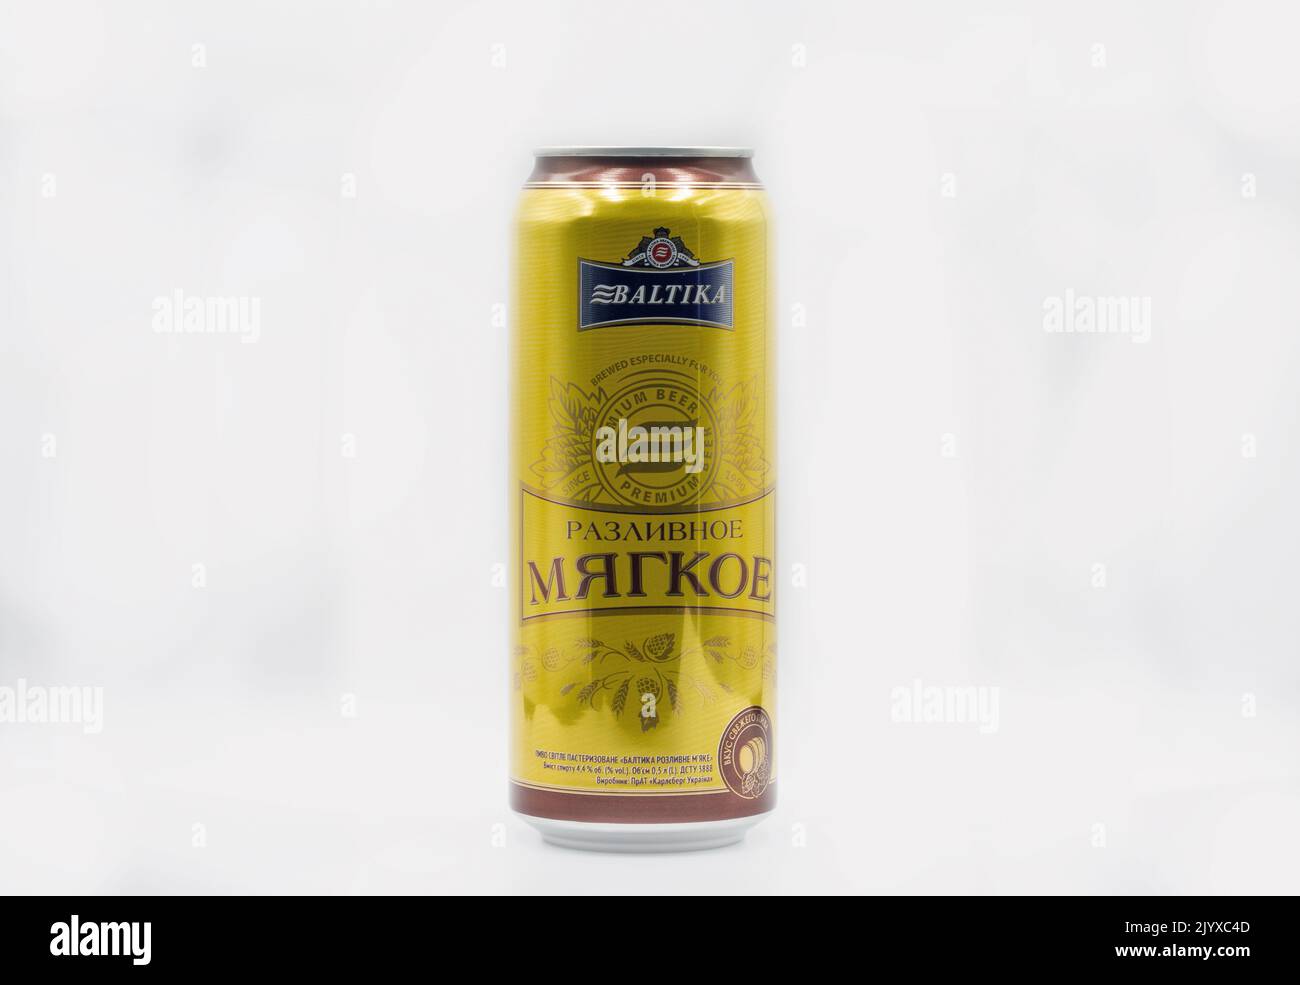 Kyiv, Ukraine - June 26, 2021: Baltika Smooth lager beer can closeup against white bacground. Baltika Brewery is the second largest brewing company in Stock Photo